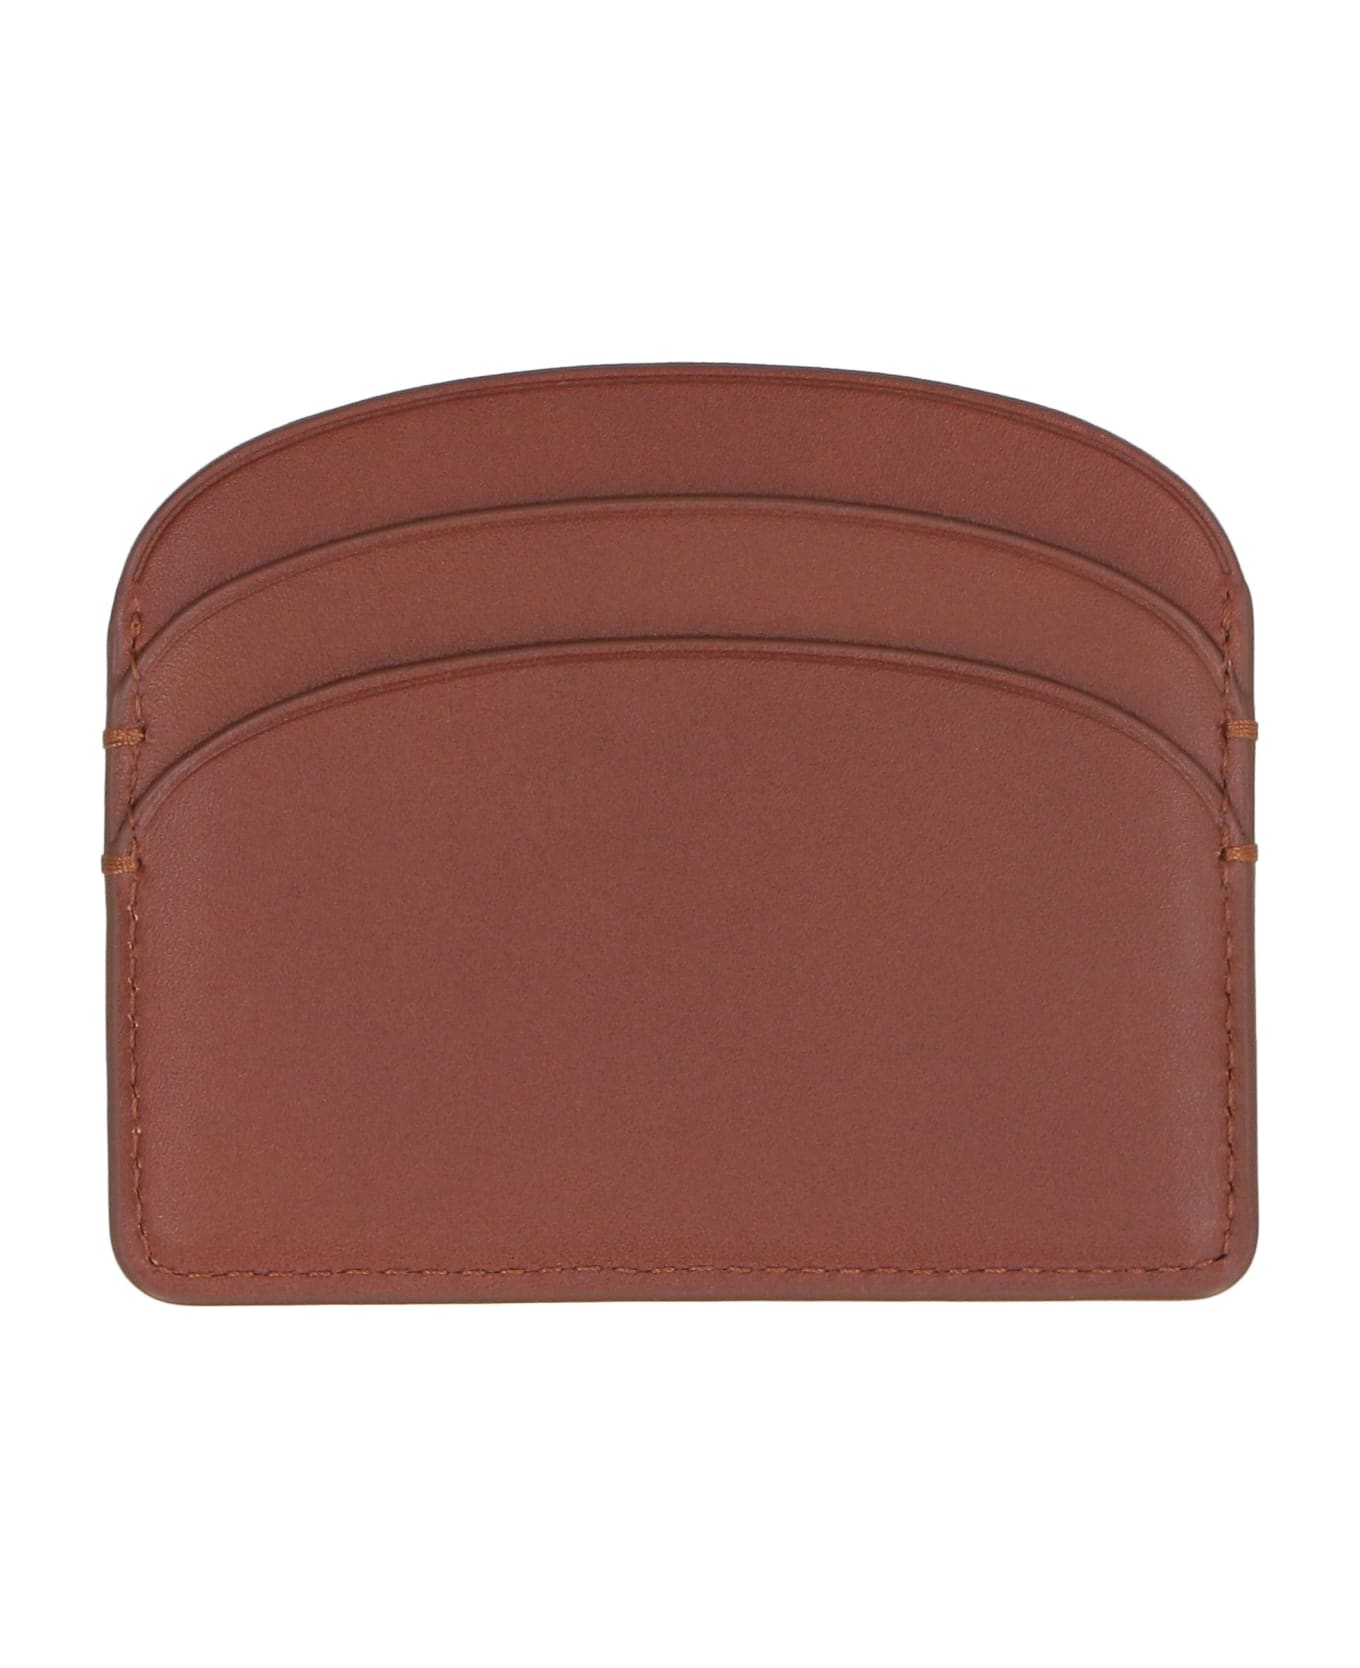 A.P.C. Logo Detail Leather Card Holder - brown